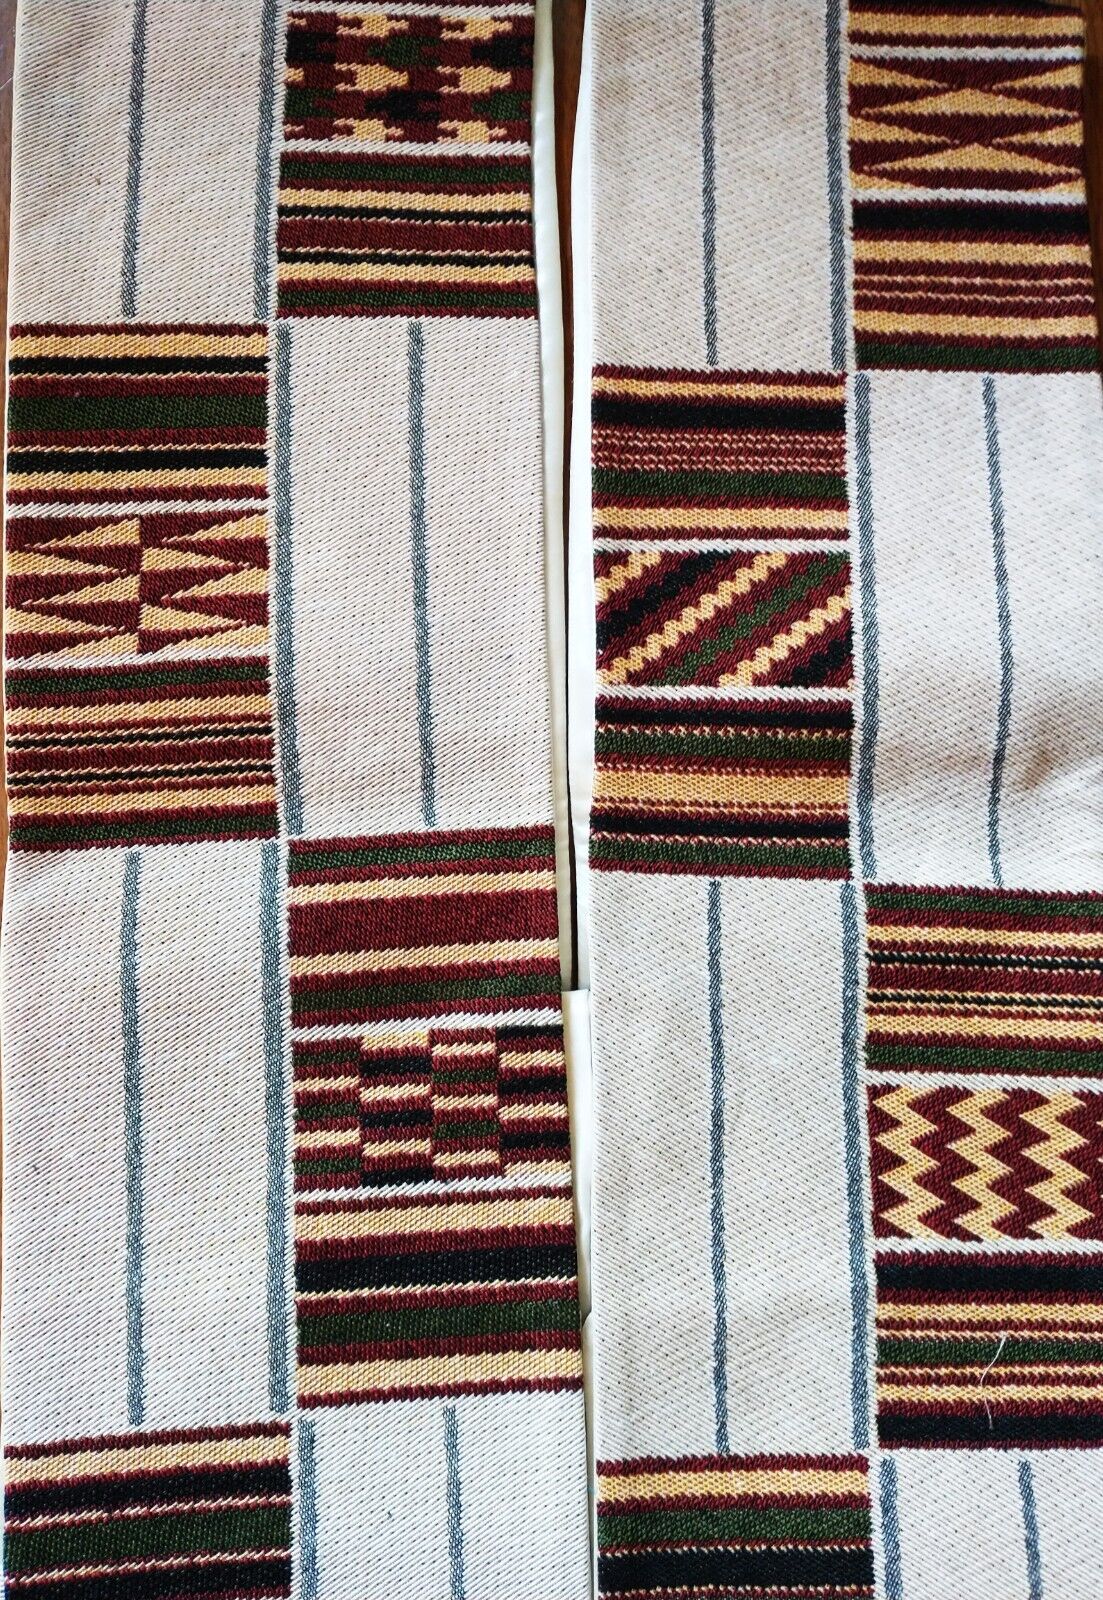 Deacon's  Stole with African Design from Ecumenicus